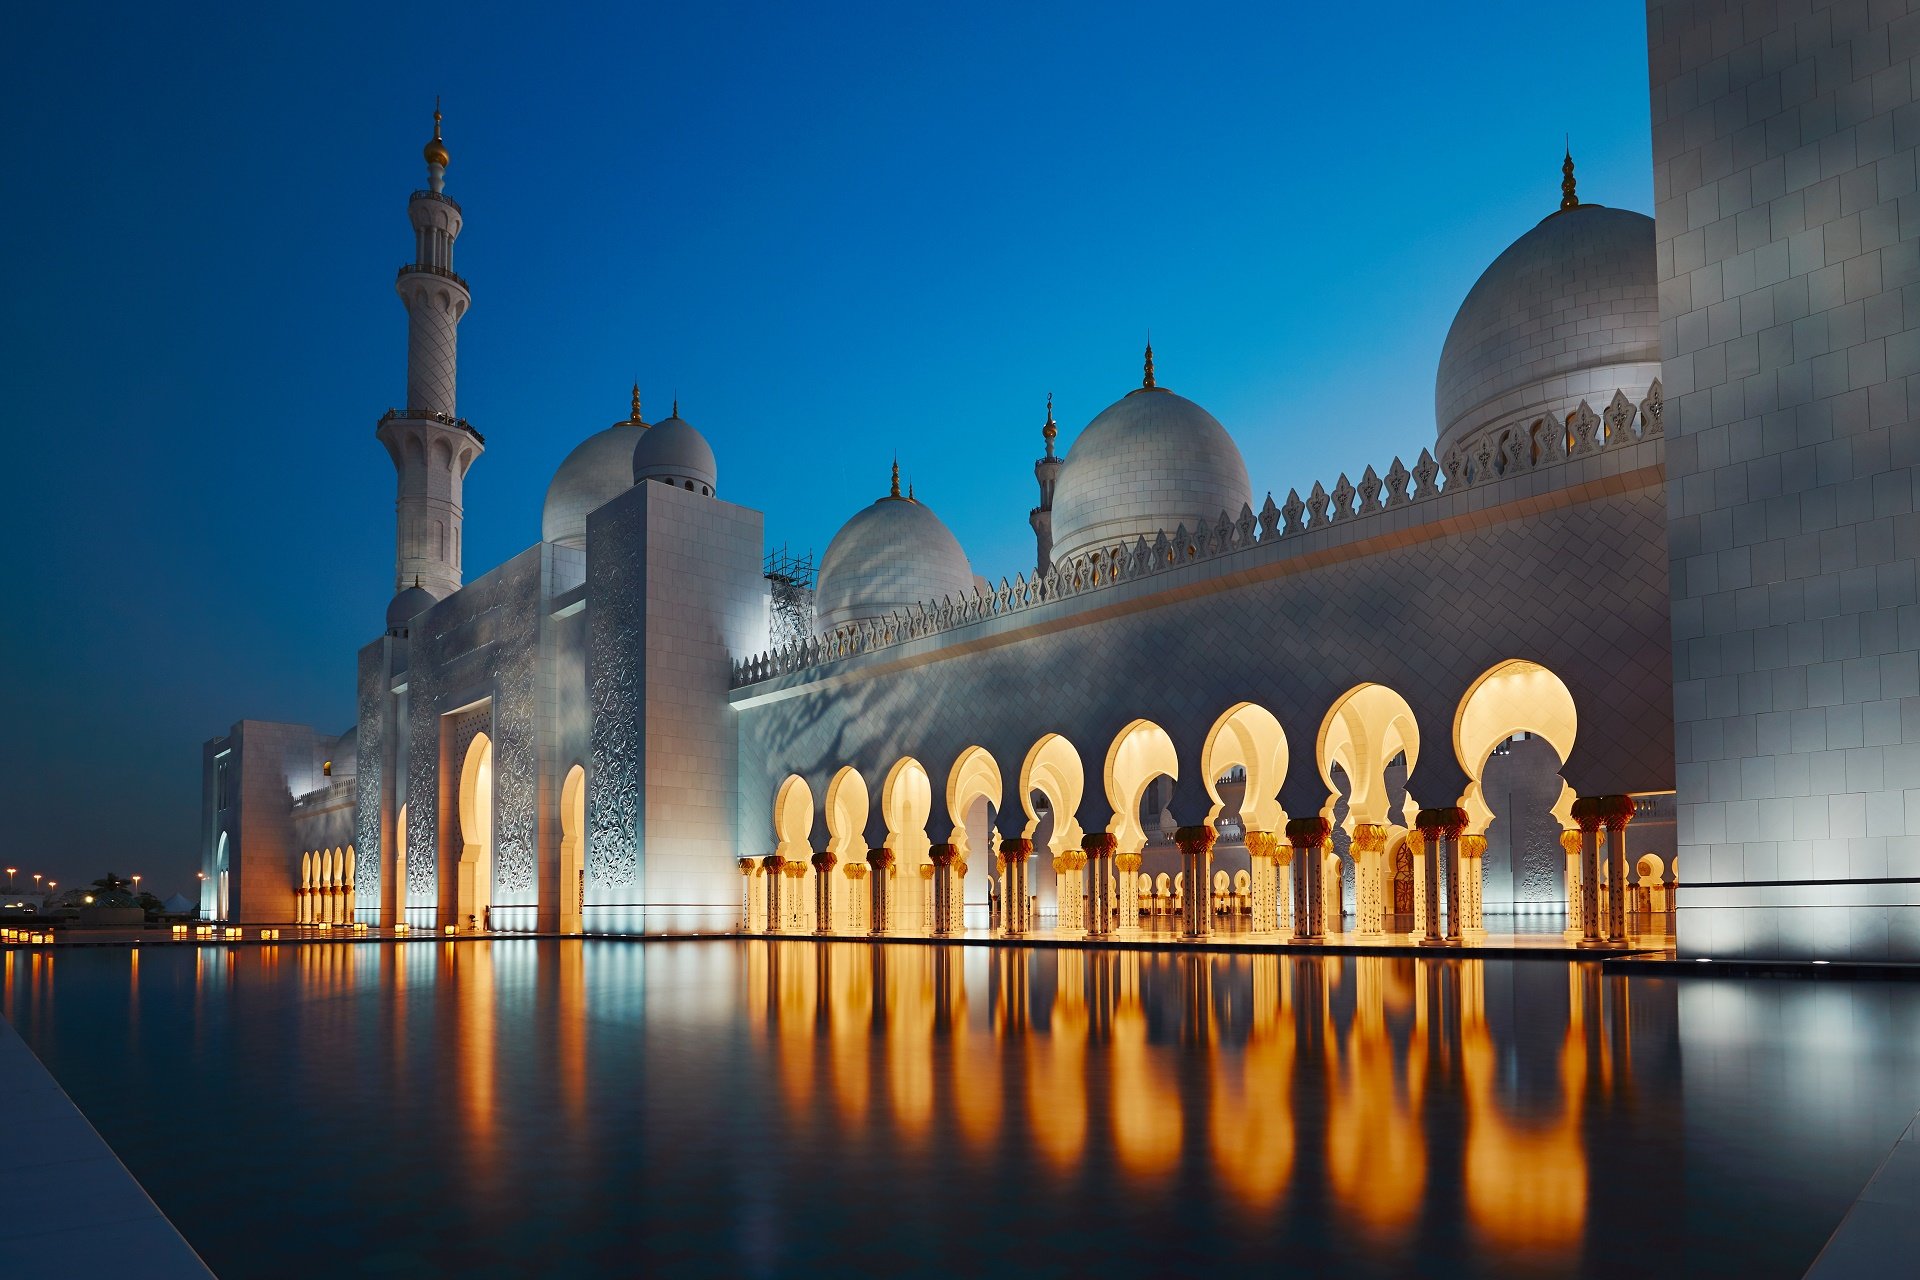 sheikh wallpaper,mosque,landmark,reflection,holy places,building